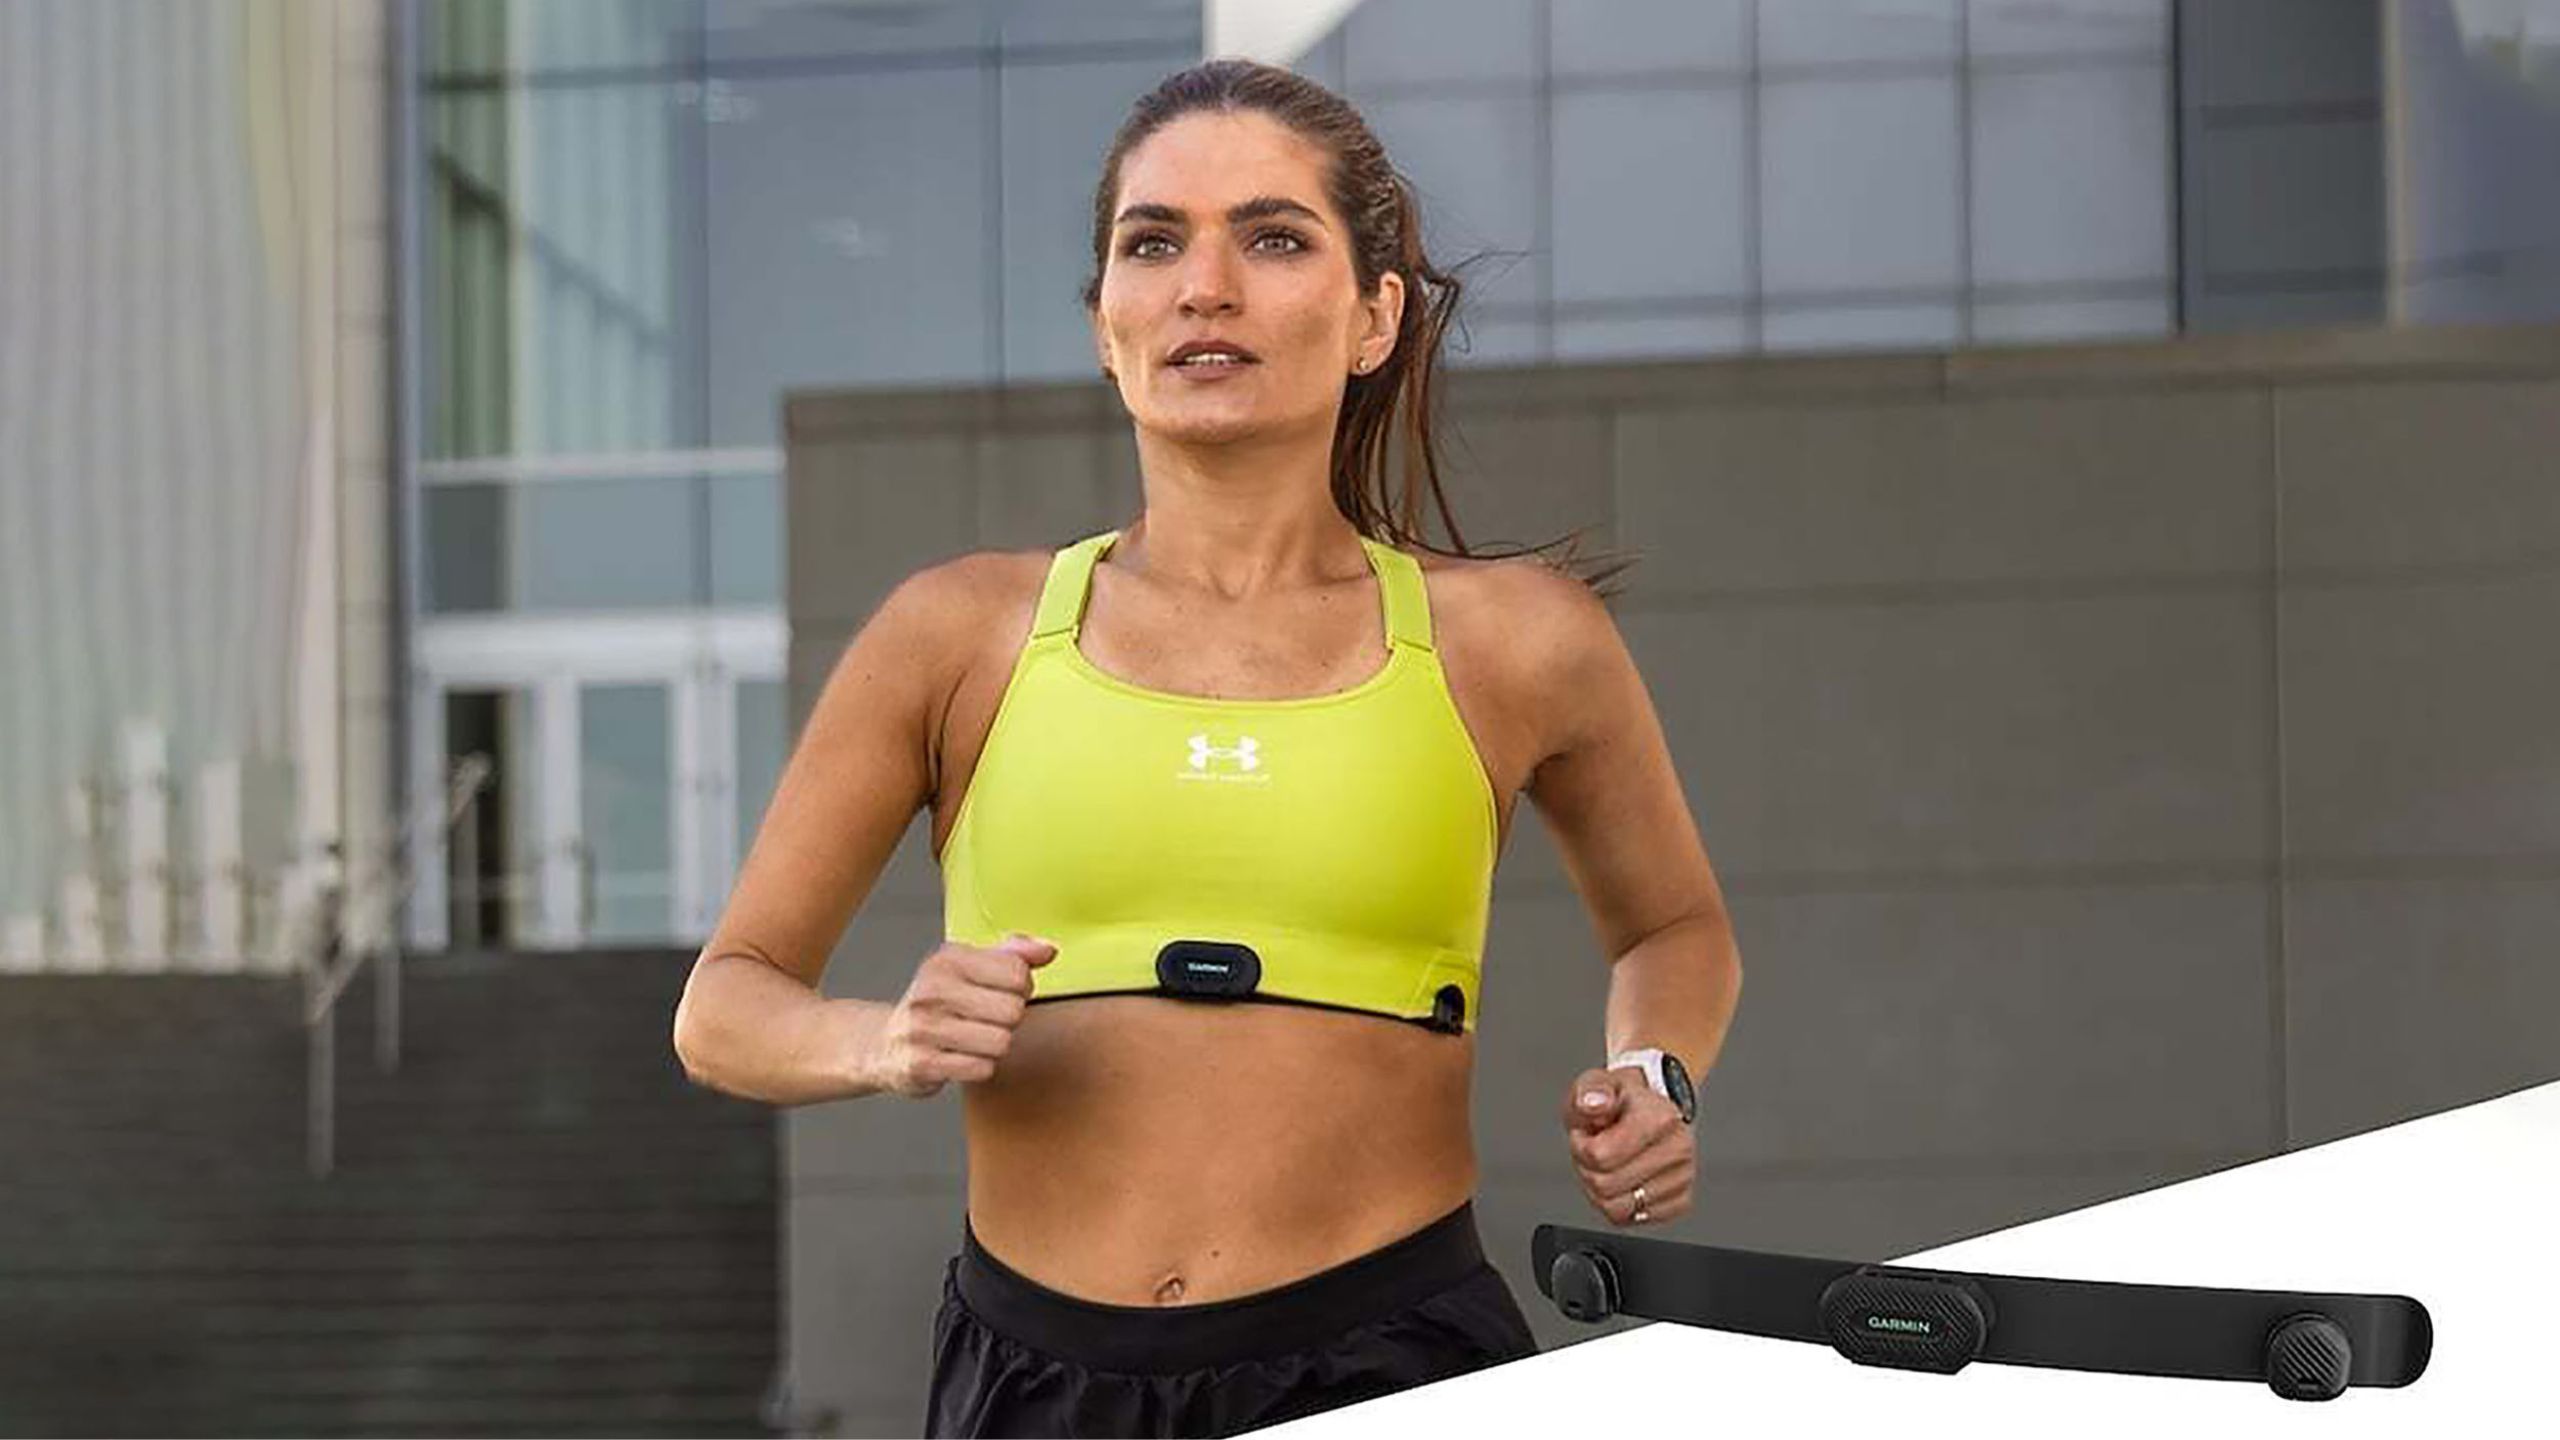 Garmin's HRM heart-rate monitor attaches directly to your sports bra